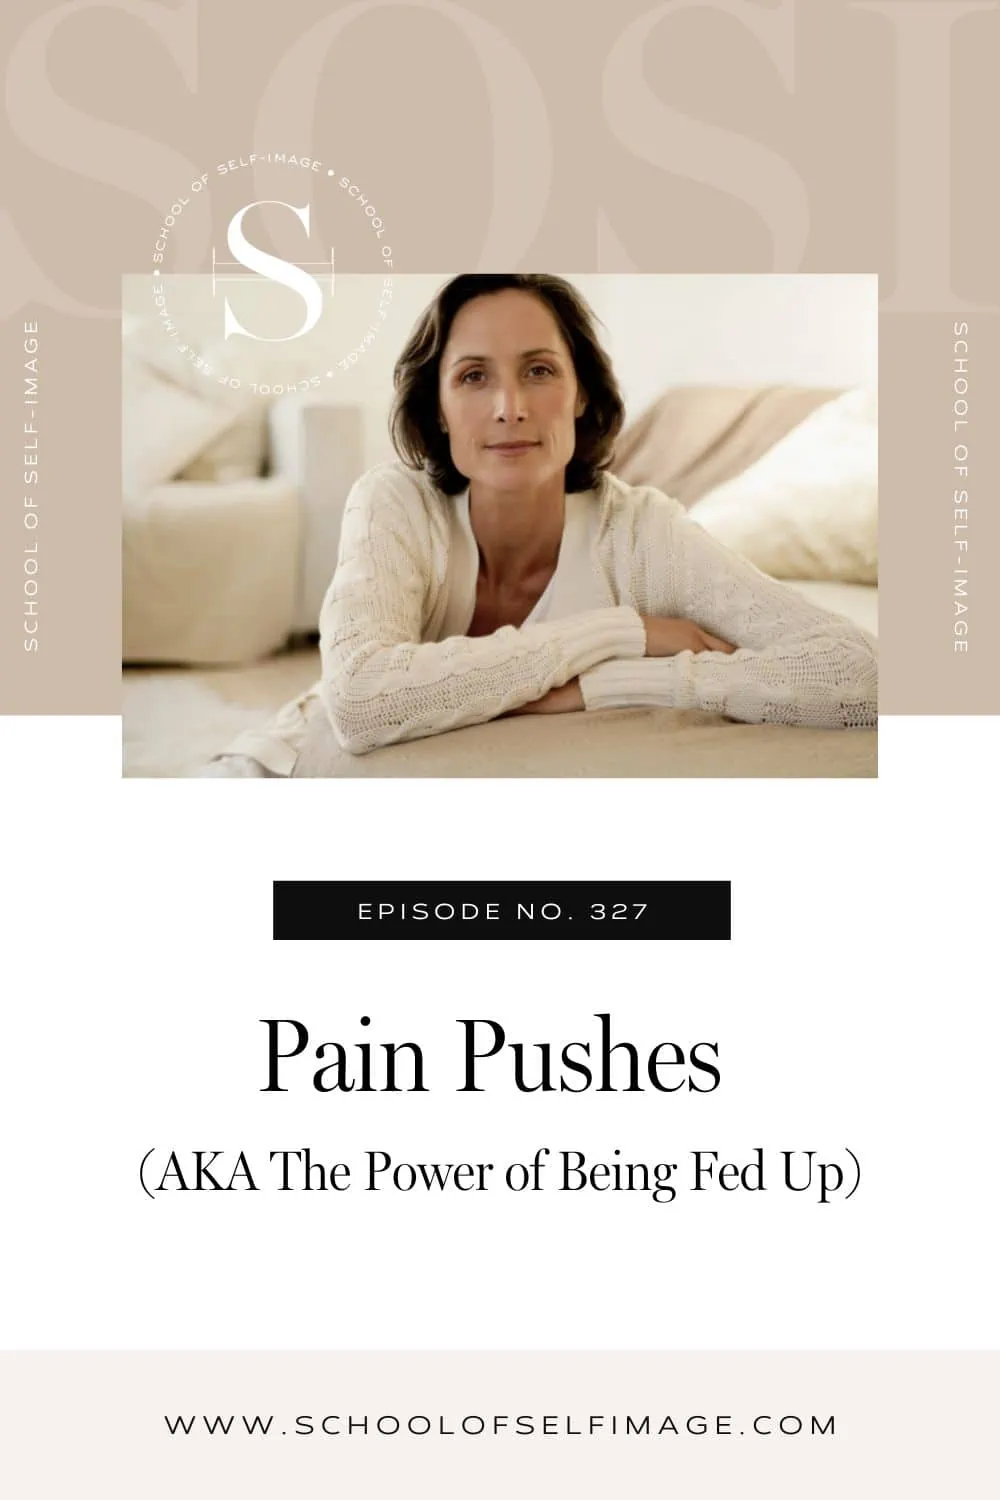 Pain Pushes AKA The Power of Being Fed UP